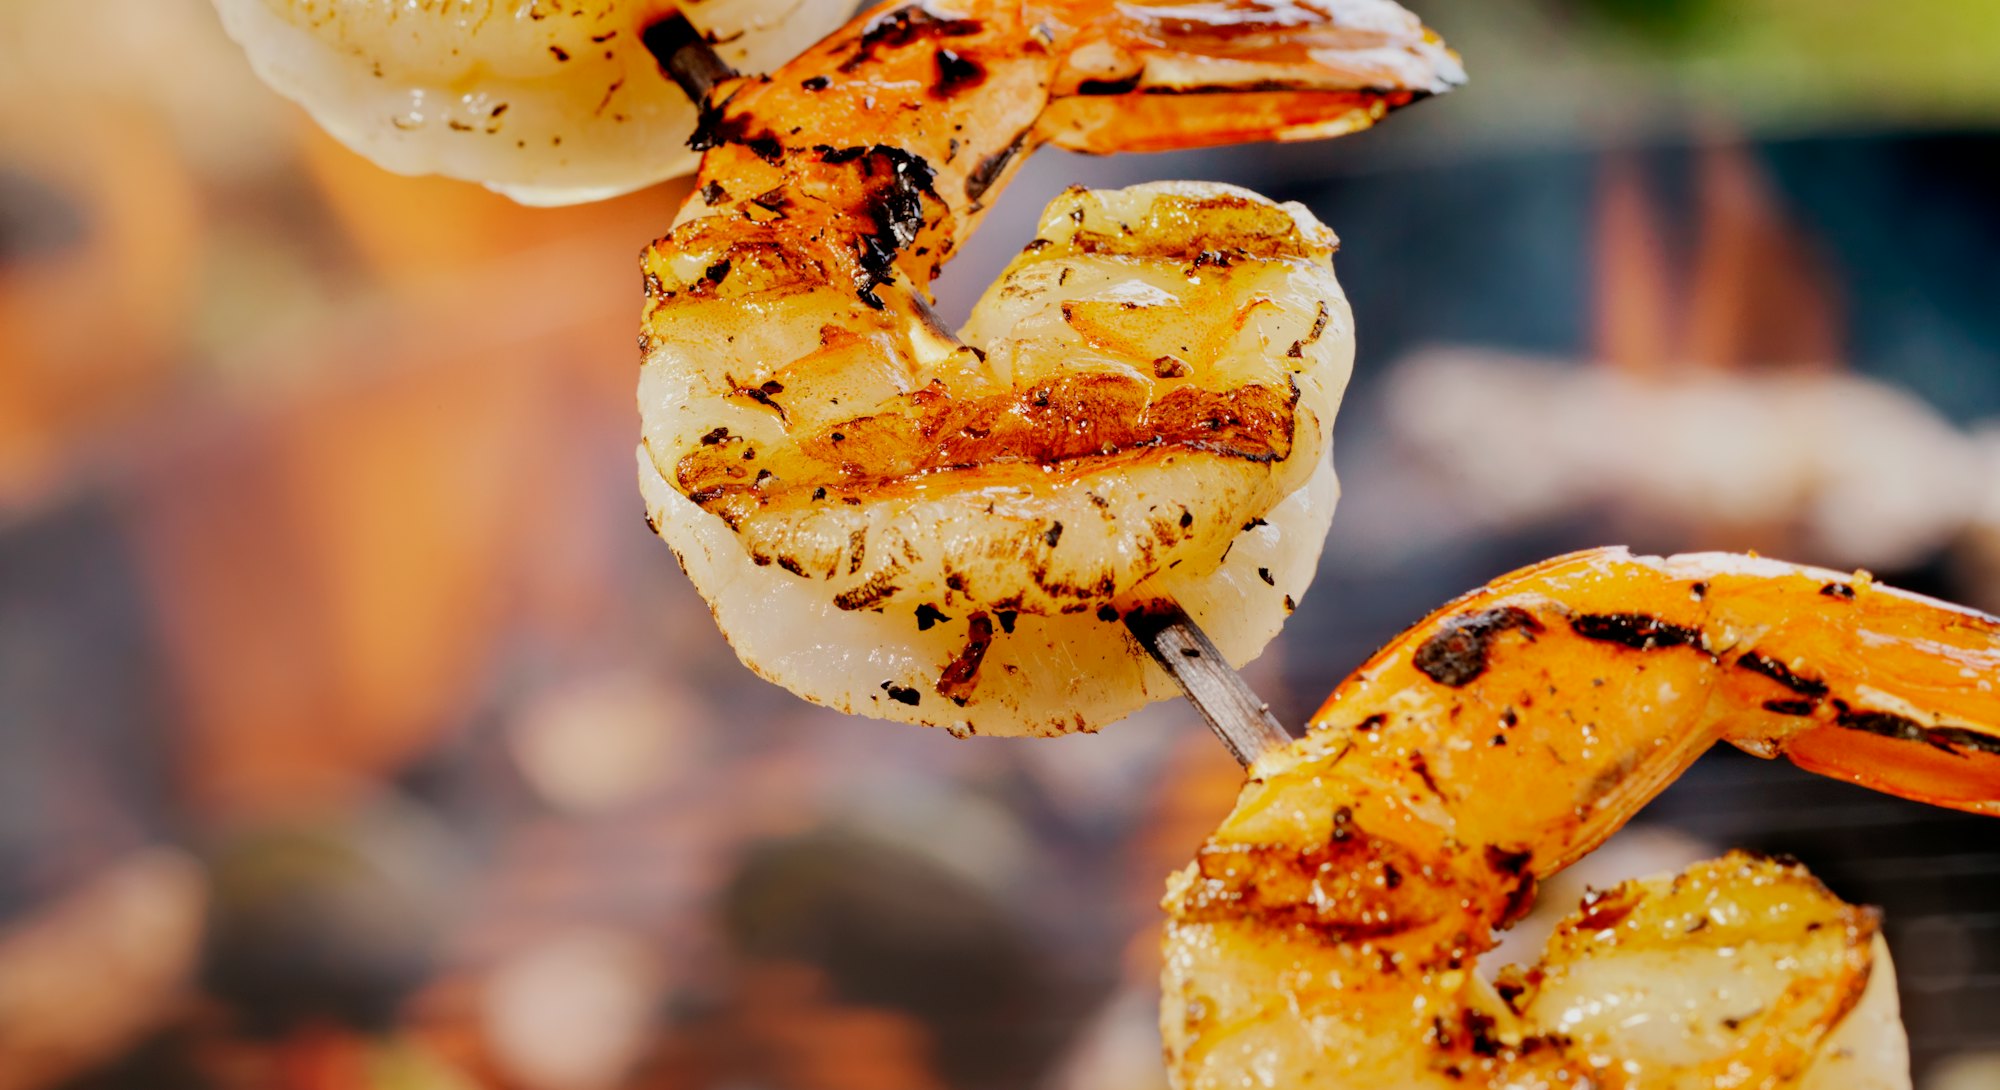 Add shrimp to a skewer for Memorial Day recipes.